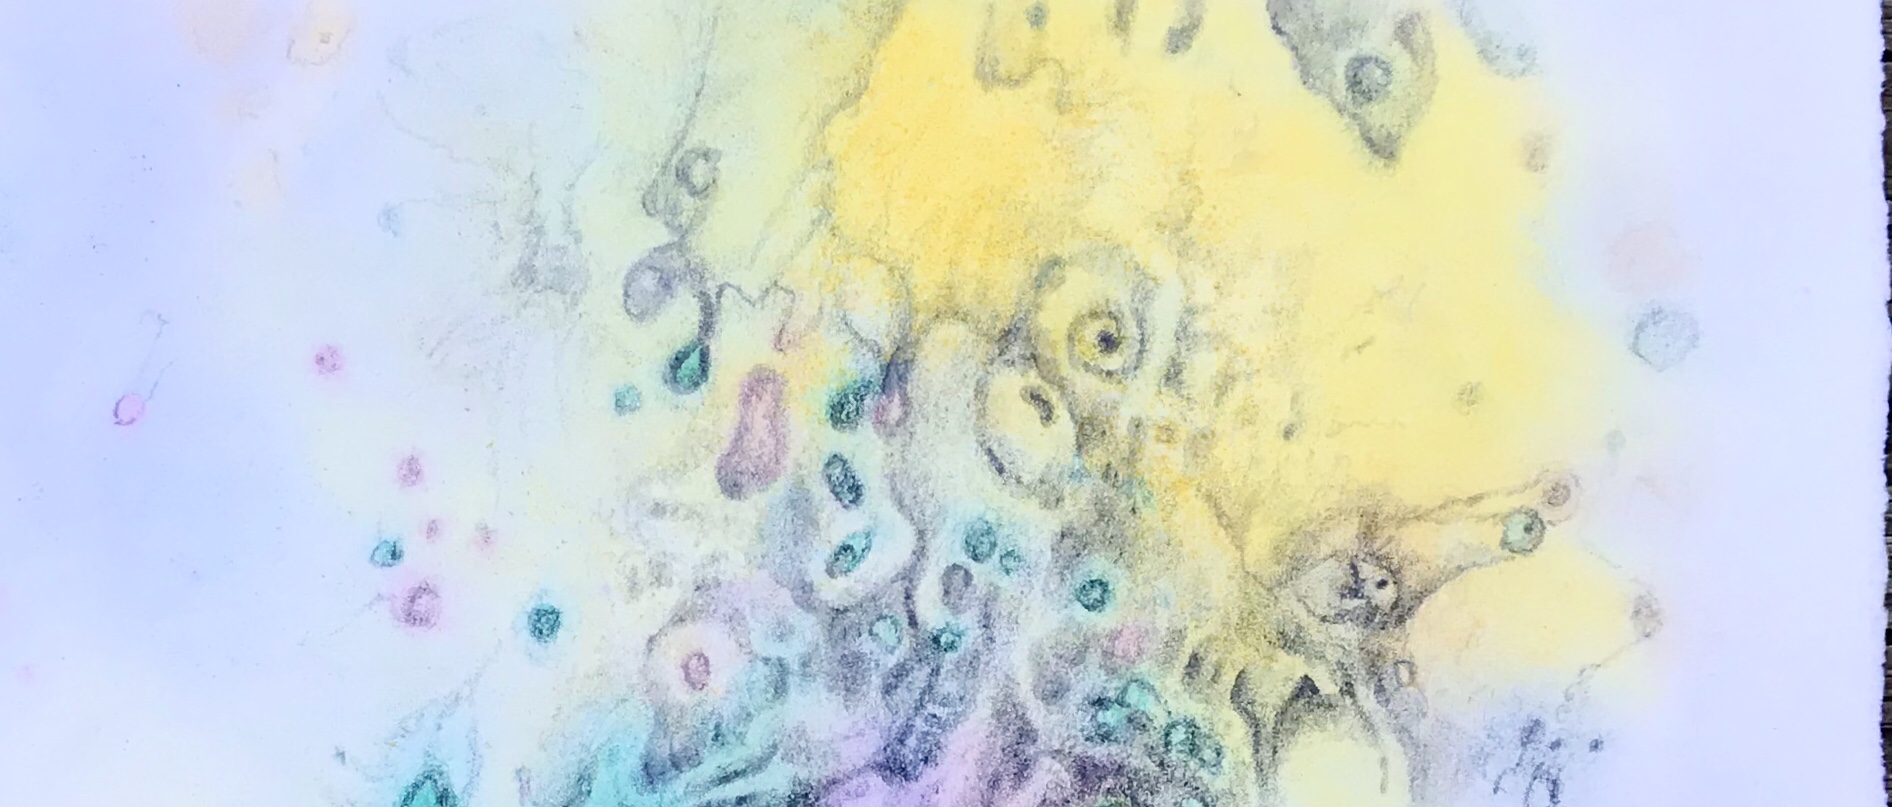 Detail of an abstract free association drawing over an abstract watercolor painting by MJ Seal